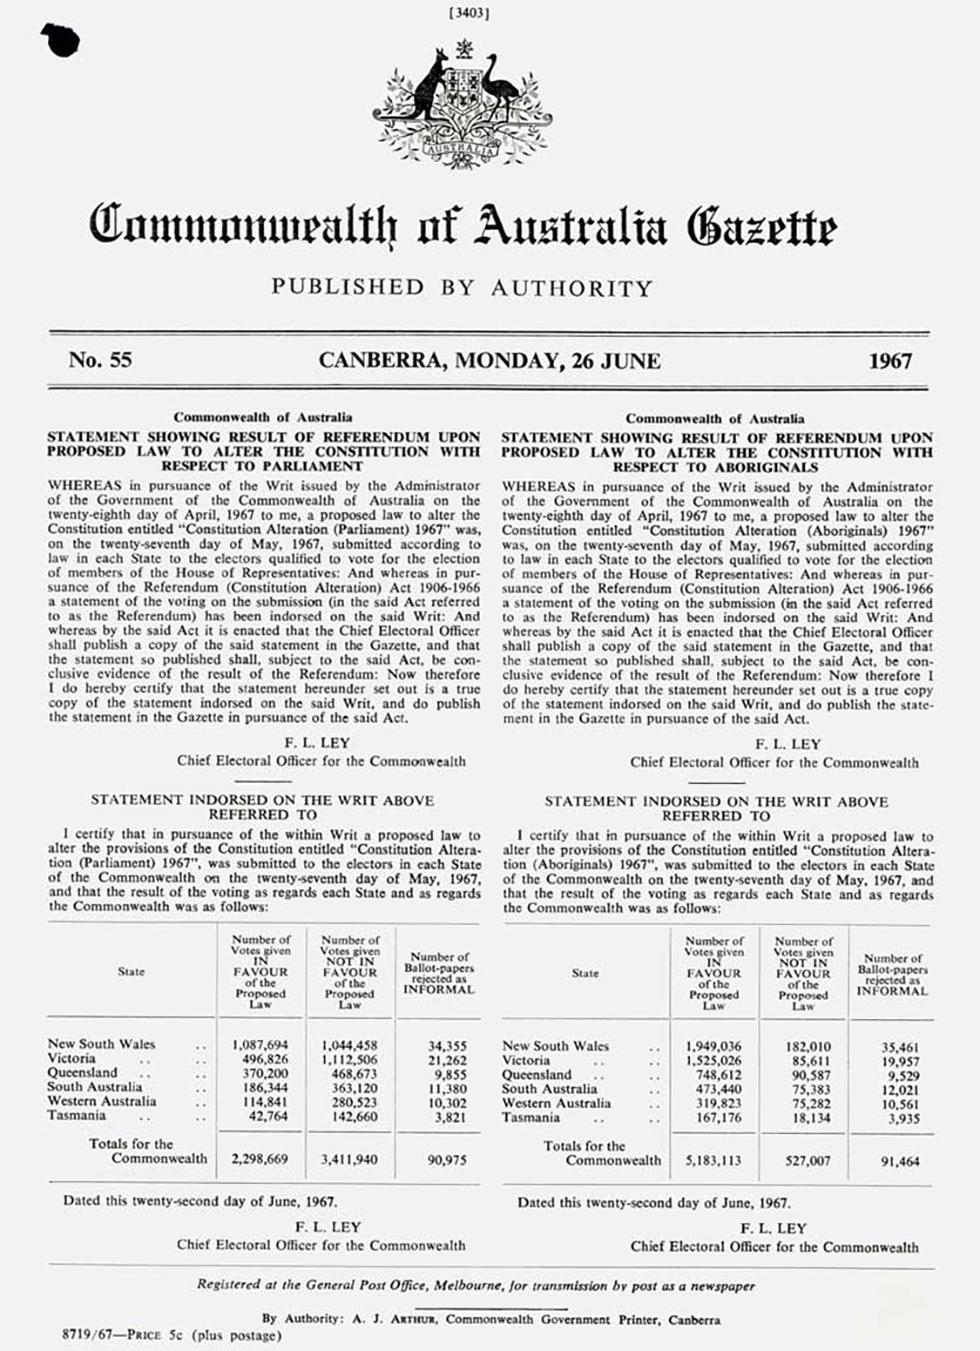 Notice of the results of the 1967 referendum.